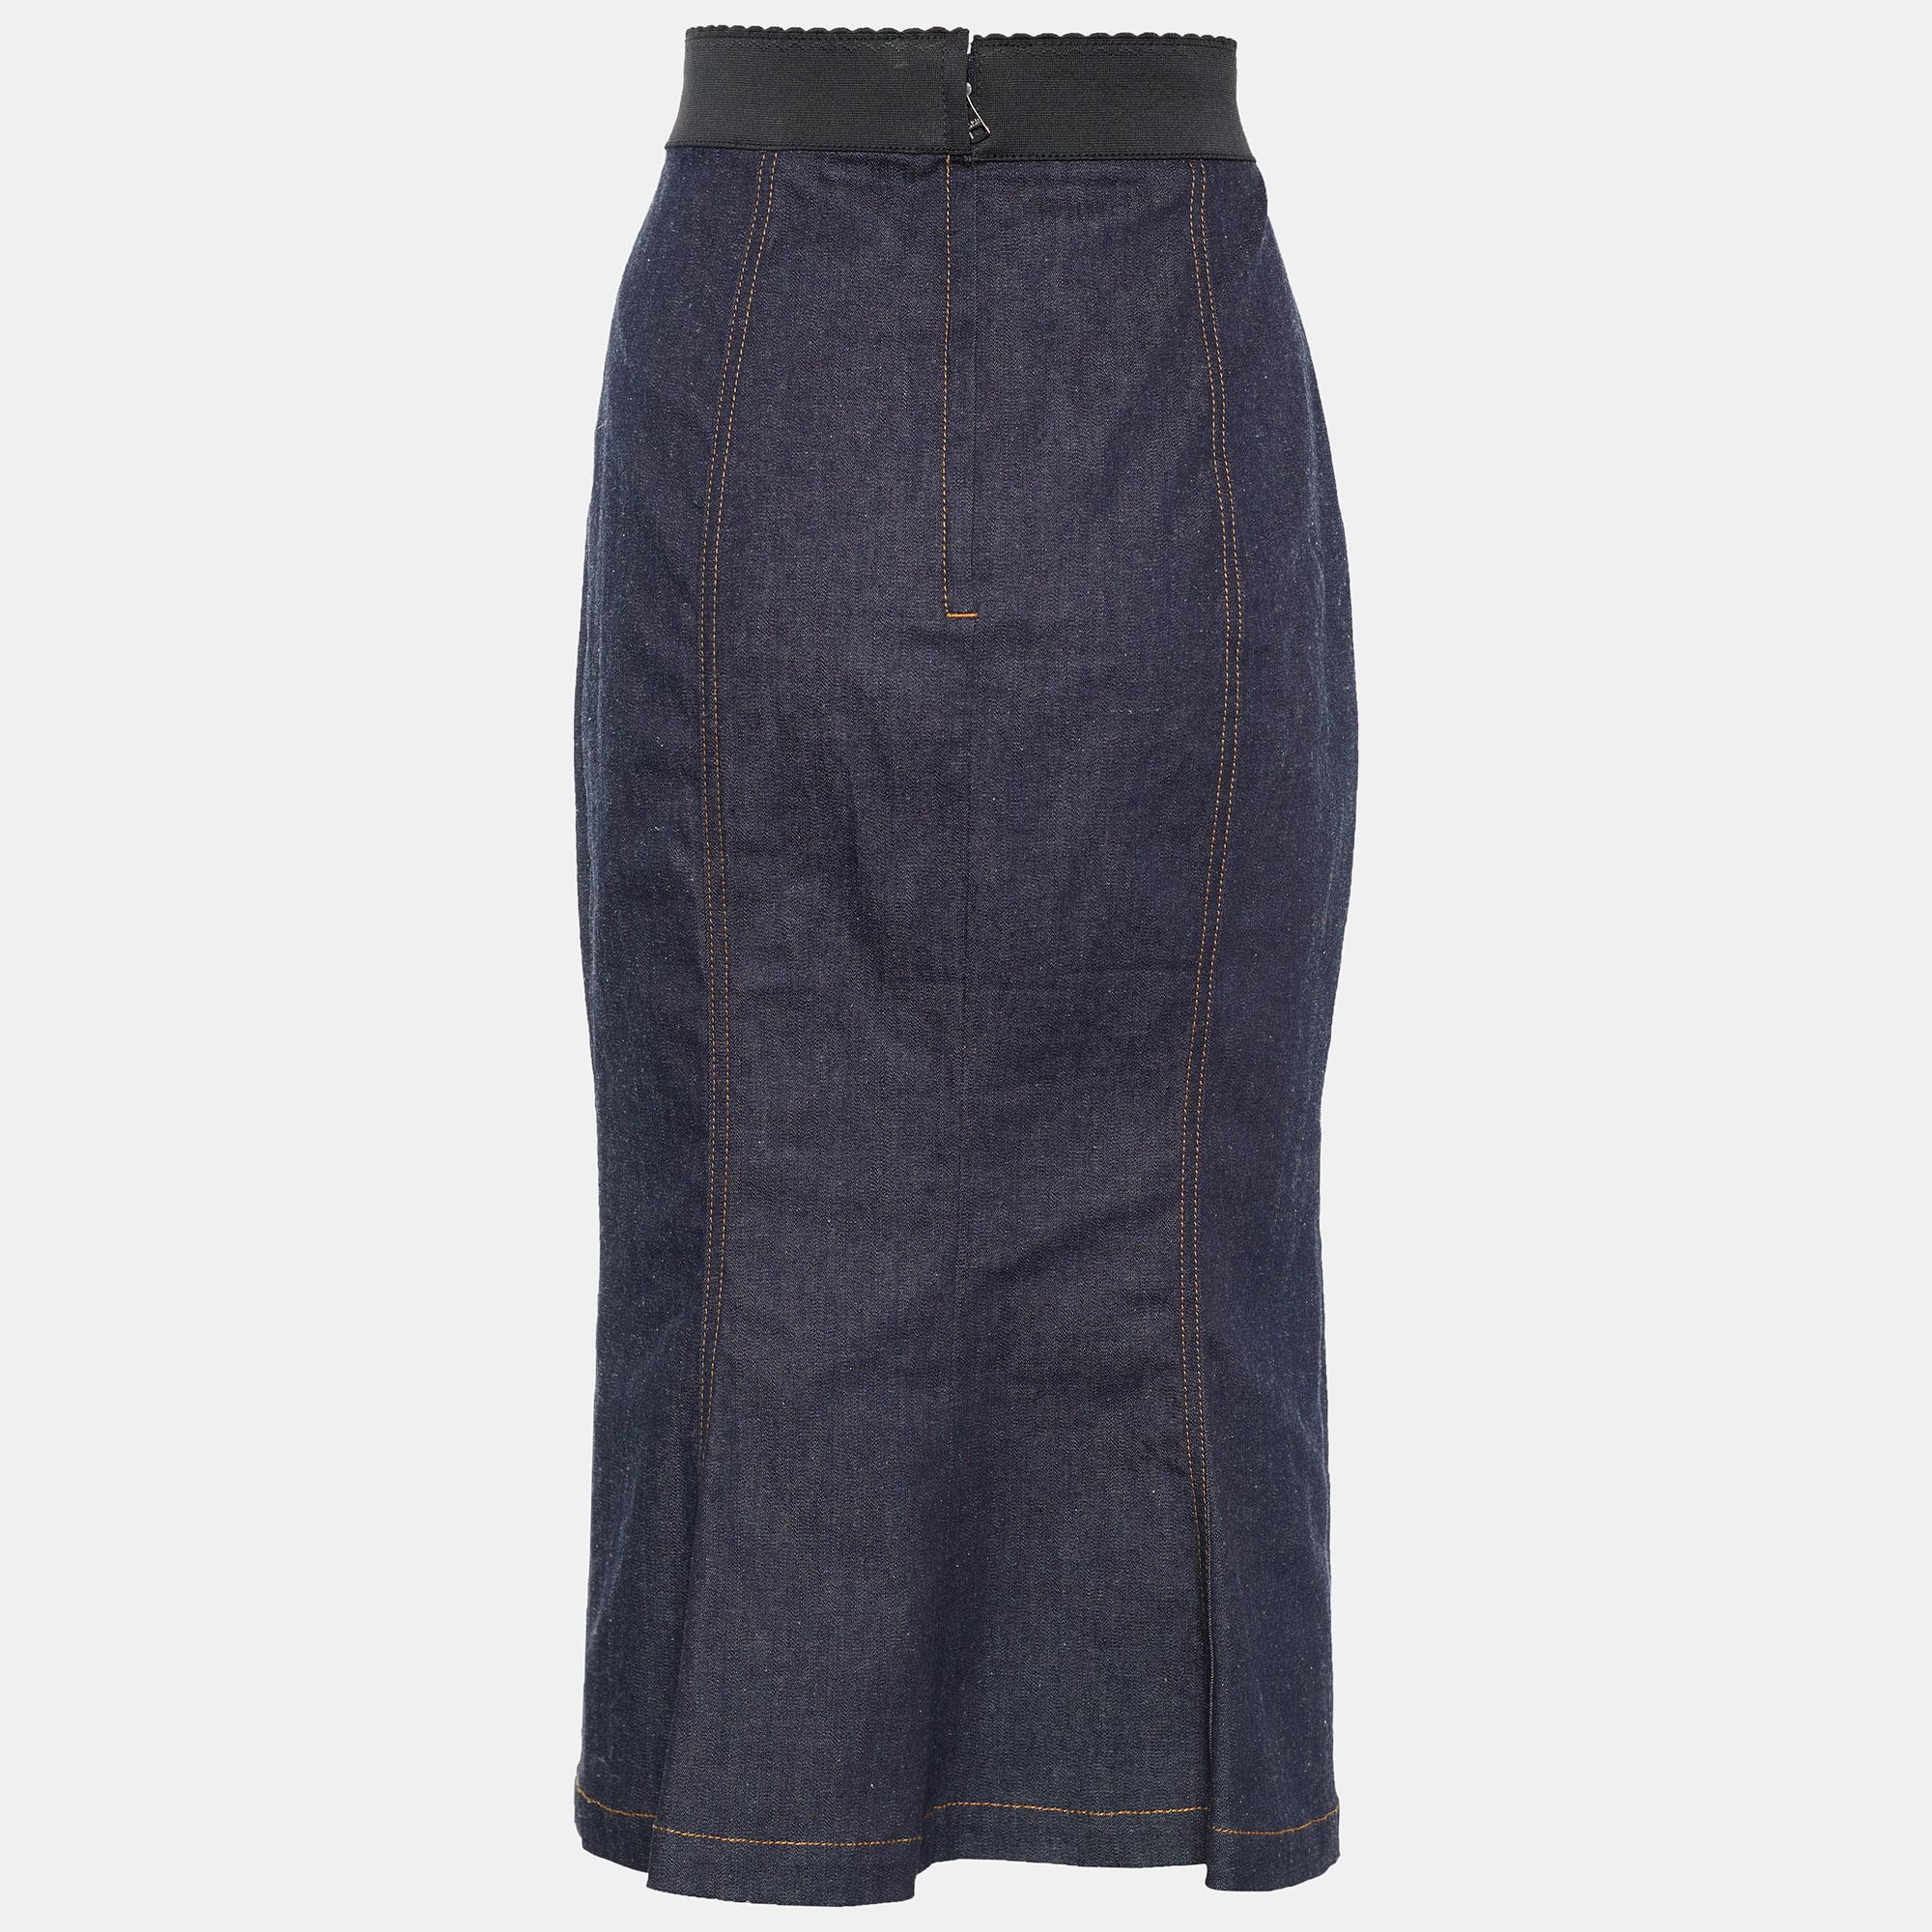 This skirt from the House of Dolce & Gabbana is a great pick to make your attire look stunning. Fashioned in blue denim fabric, this skirt flaunts a pencil-fit silhouette with a zip-type fastening. Style it with your favorite tops to make an